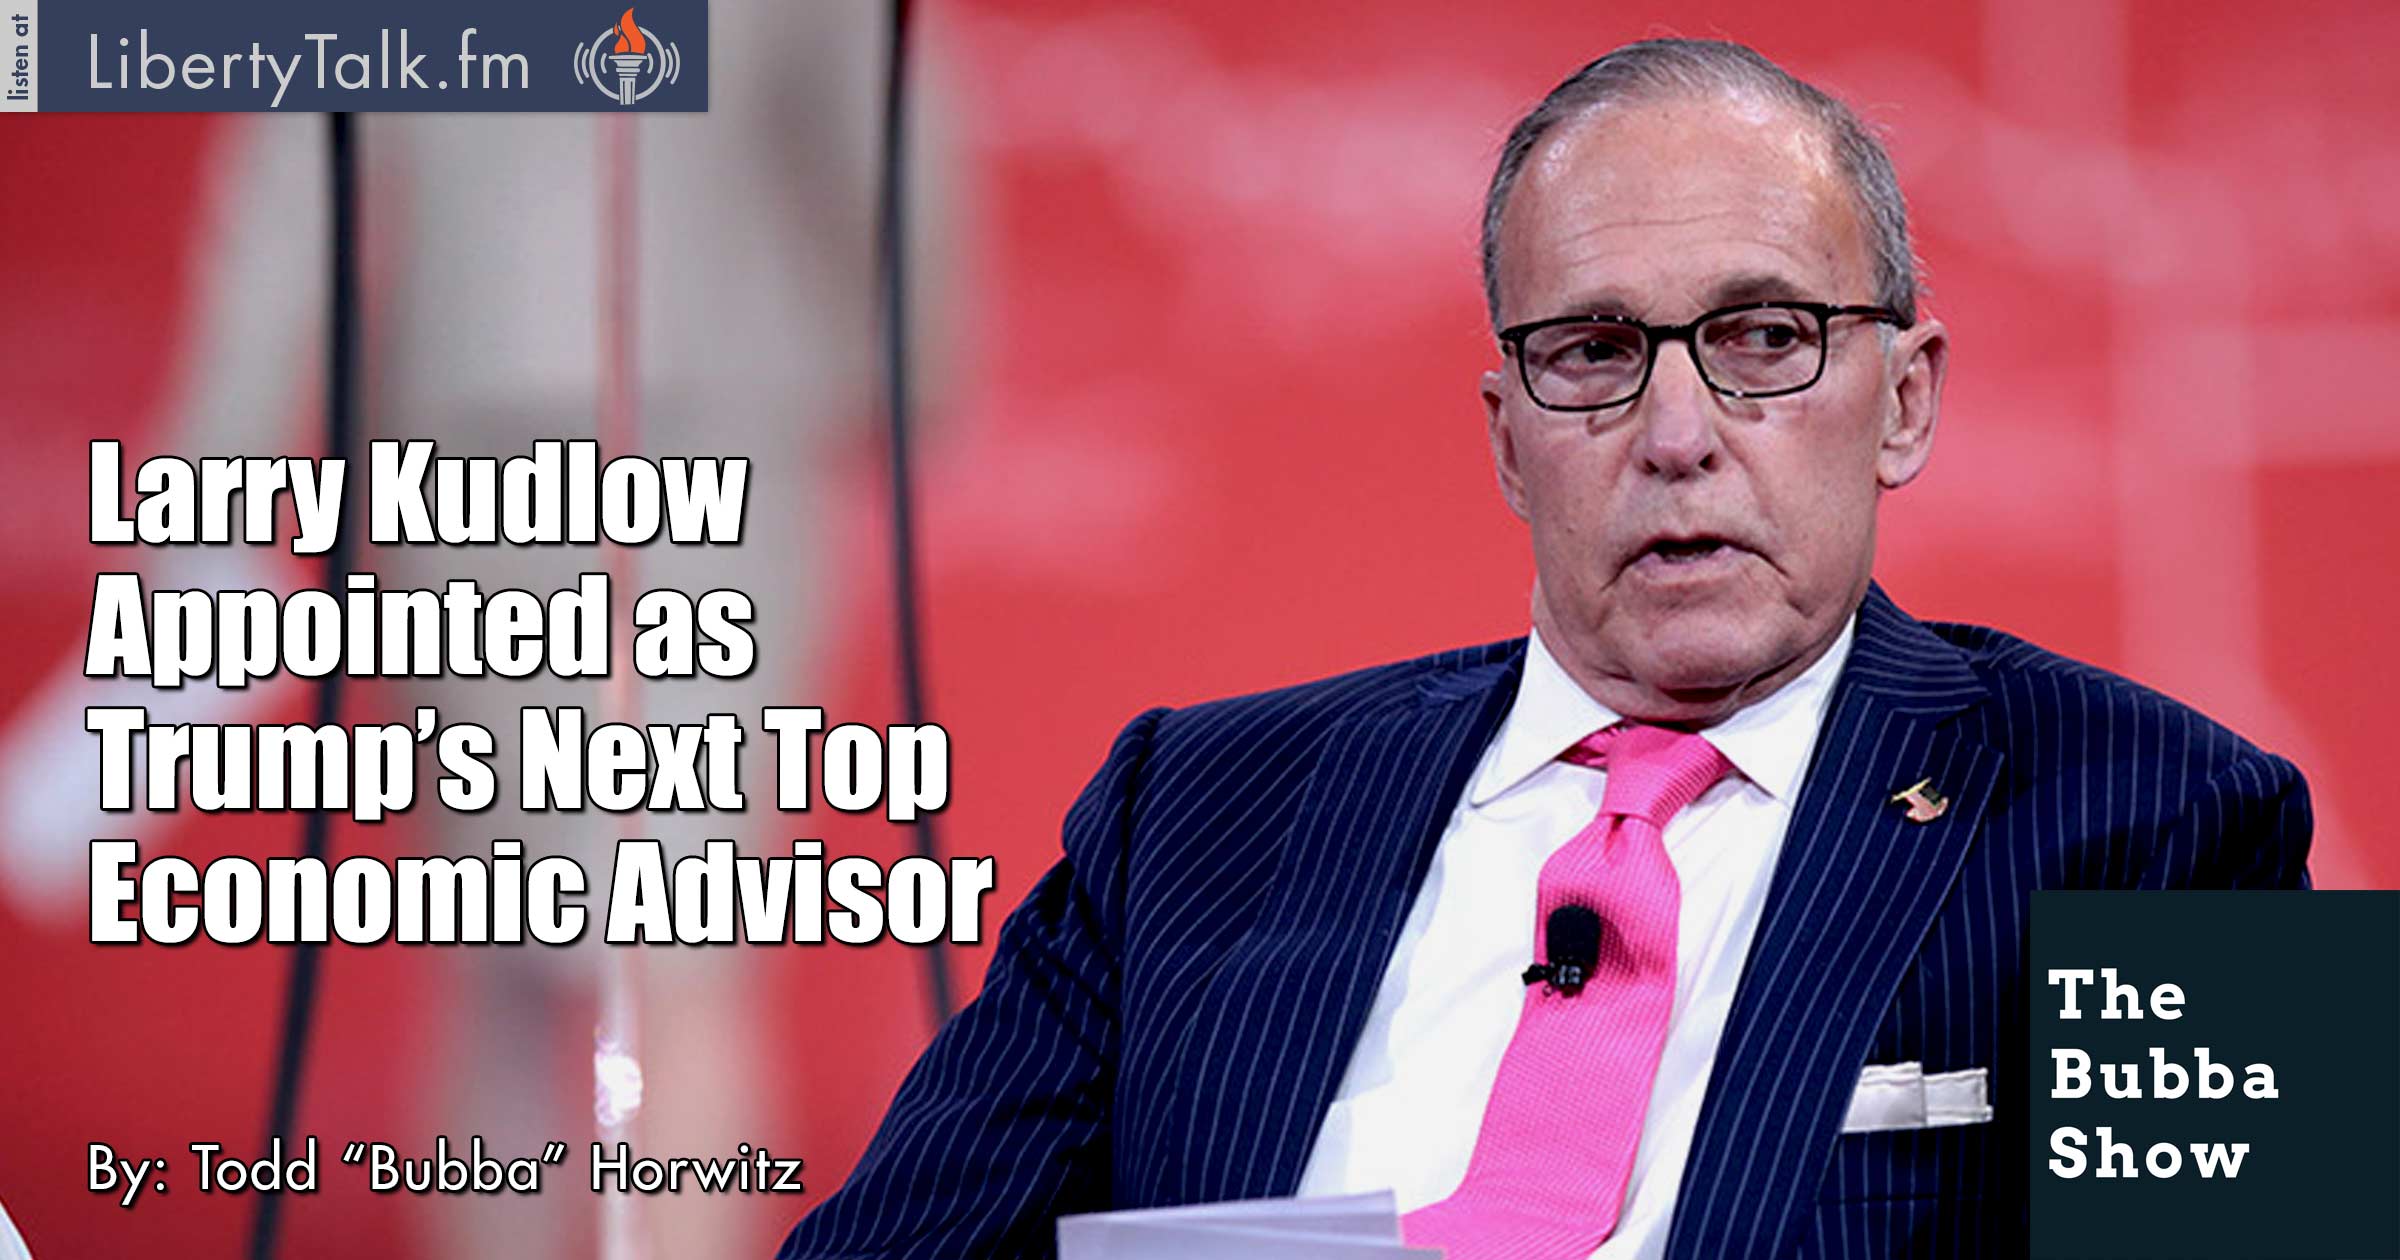 HLarry Kudlow Appointed as Trump’s Next Top Economic Advisor - The Bubba Show